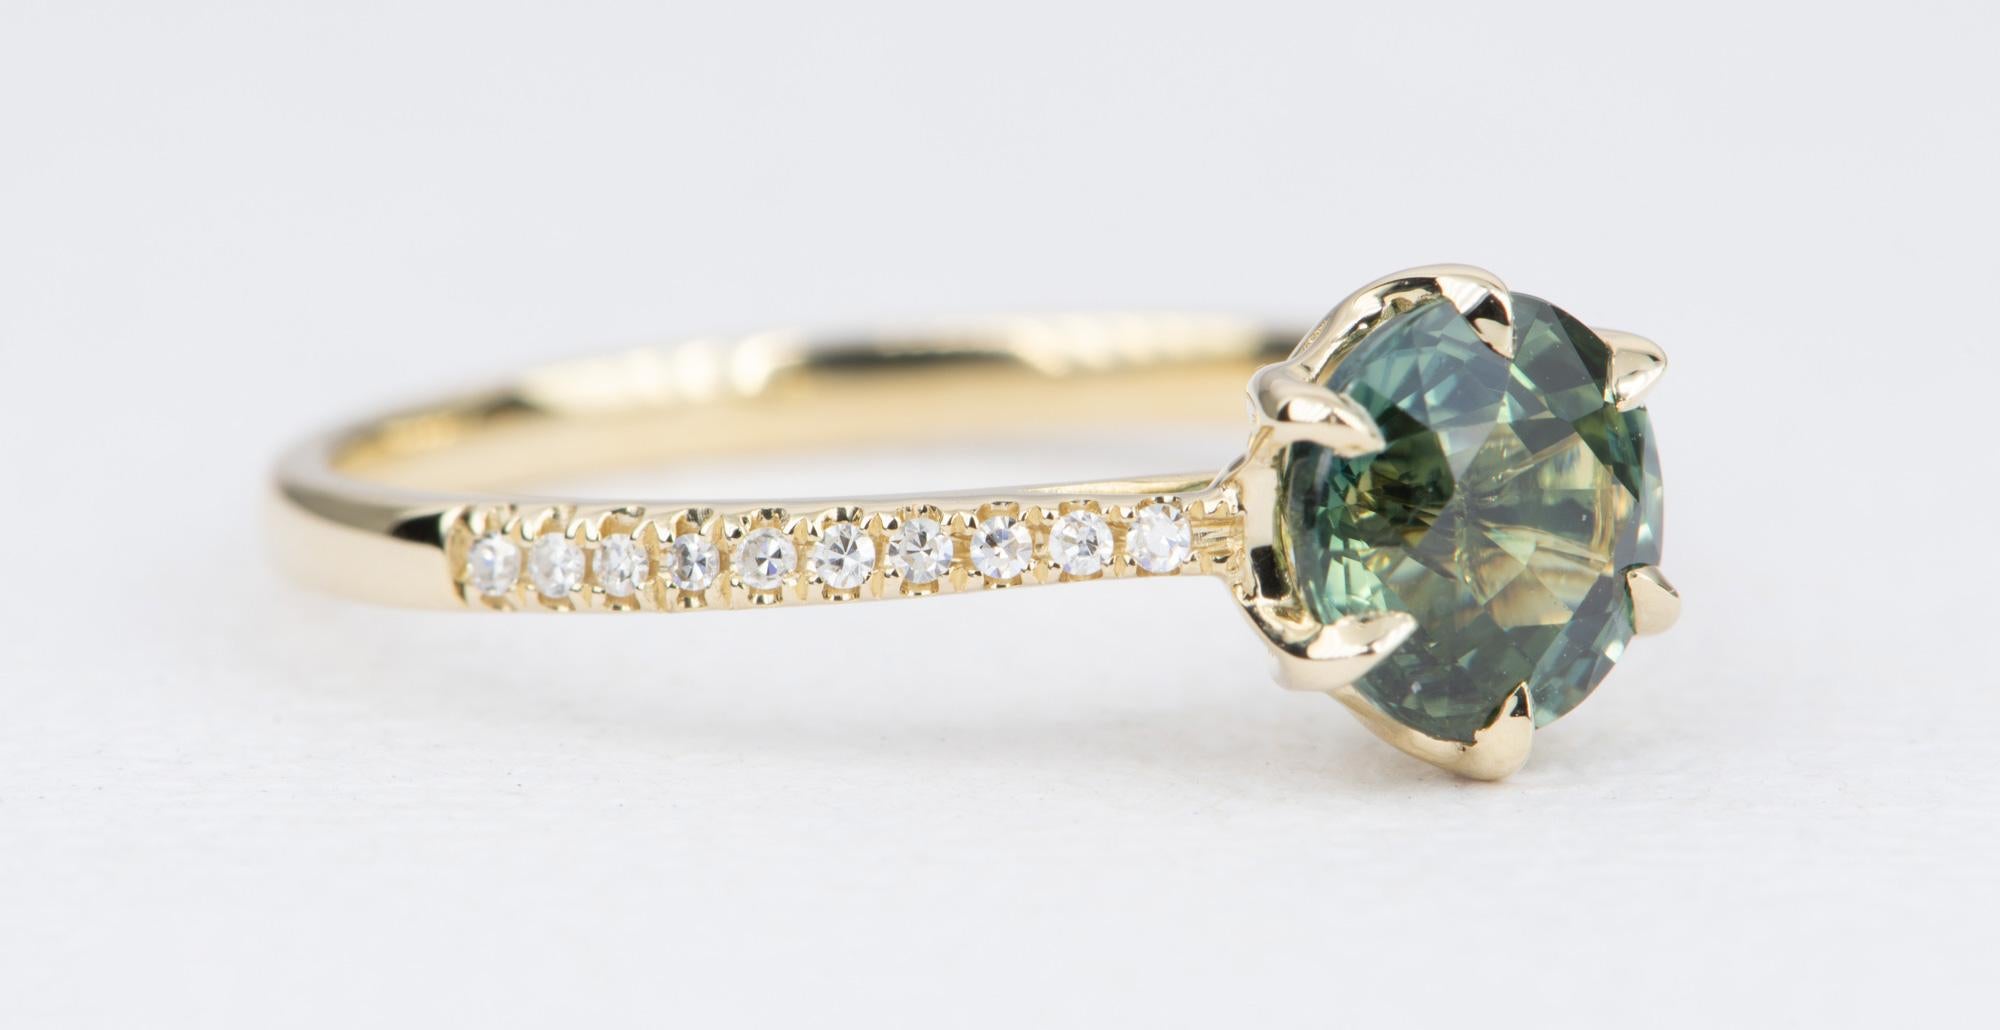 ♥  Solid 14K gold ring set with a beautiful blue green sapphire in the center.
♥  Set in a 6-prong tulip style setting, and half eternity diamond pave on the band

♥  US Size 7.25 (Free resizing)
♥  Band width measures 1.9mm
♥  Material: 14K Gold
♥ 